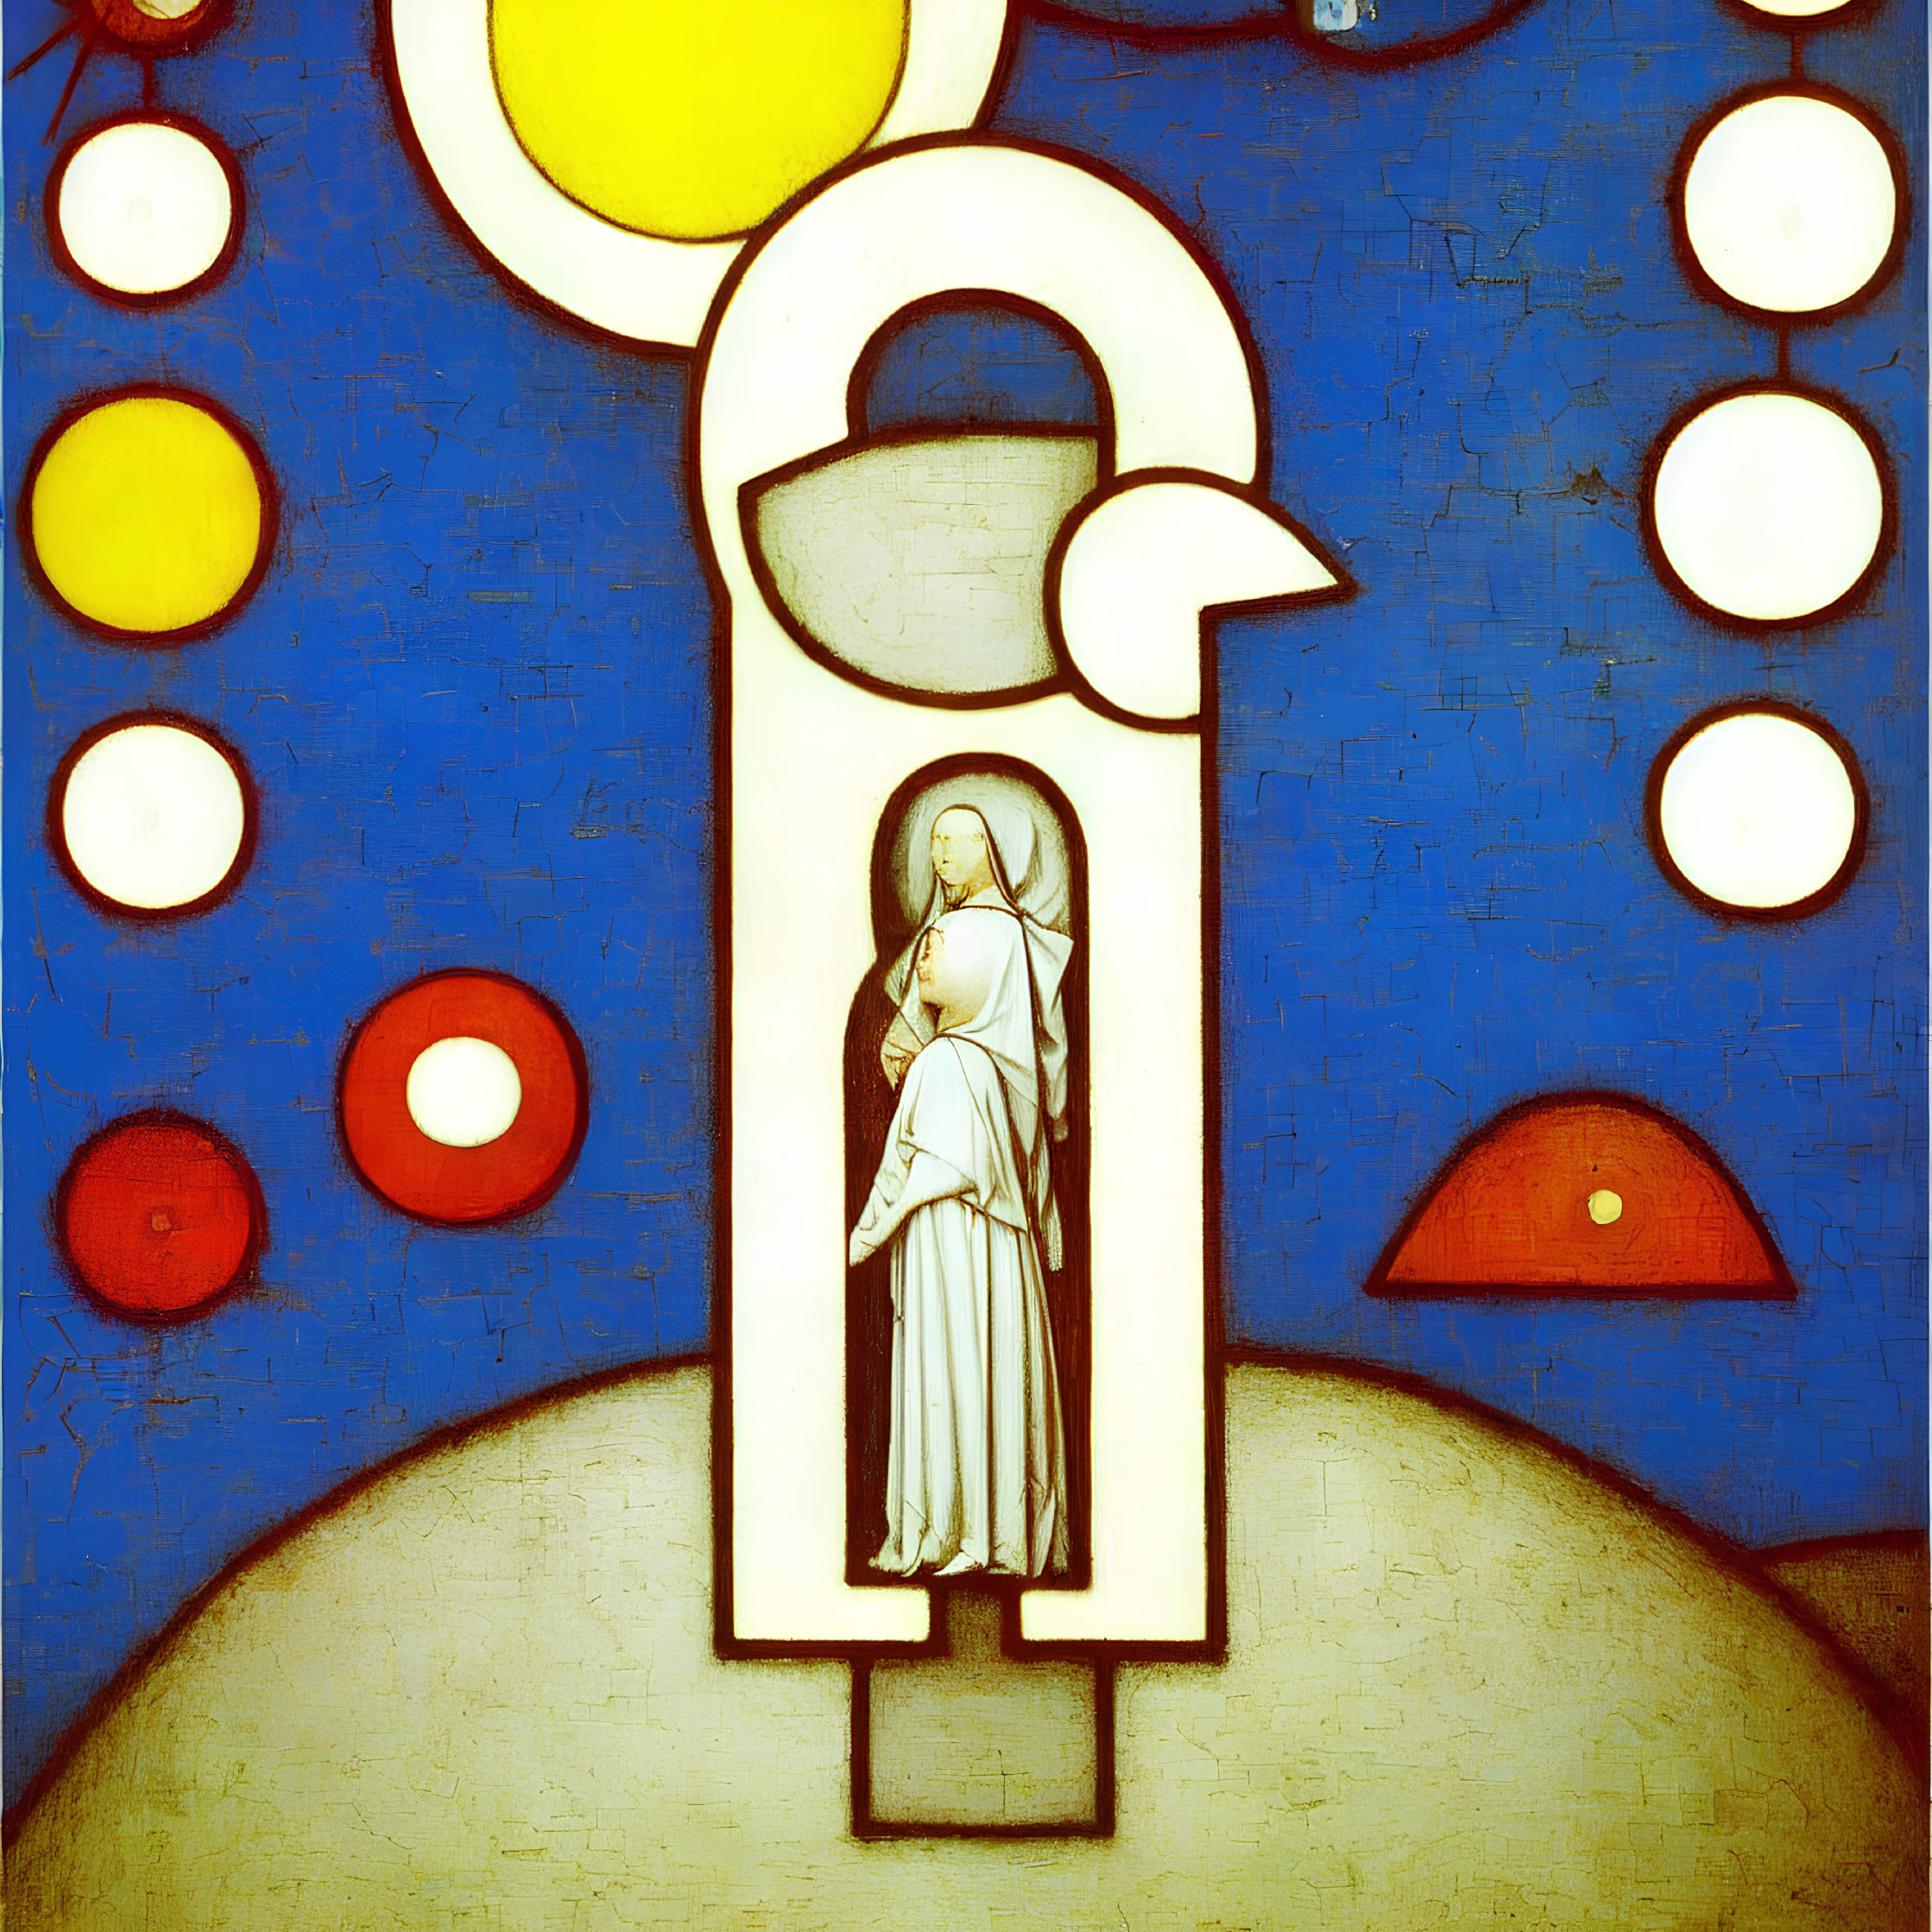 Colorful Abstract Painting with Geometric Shapes and Saint-Like Figure in Arch Structure